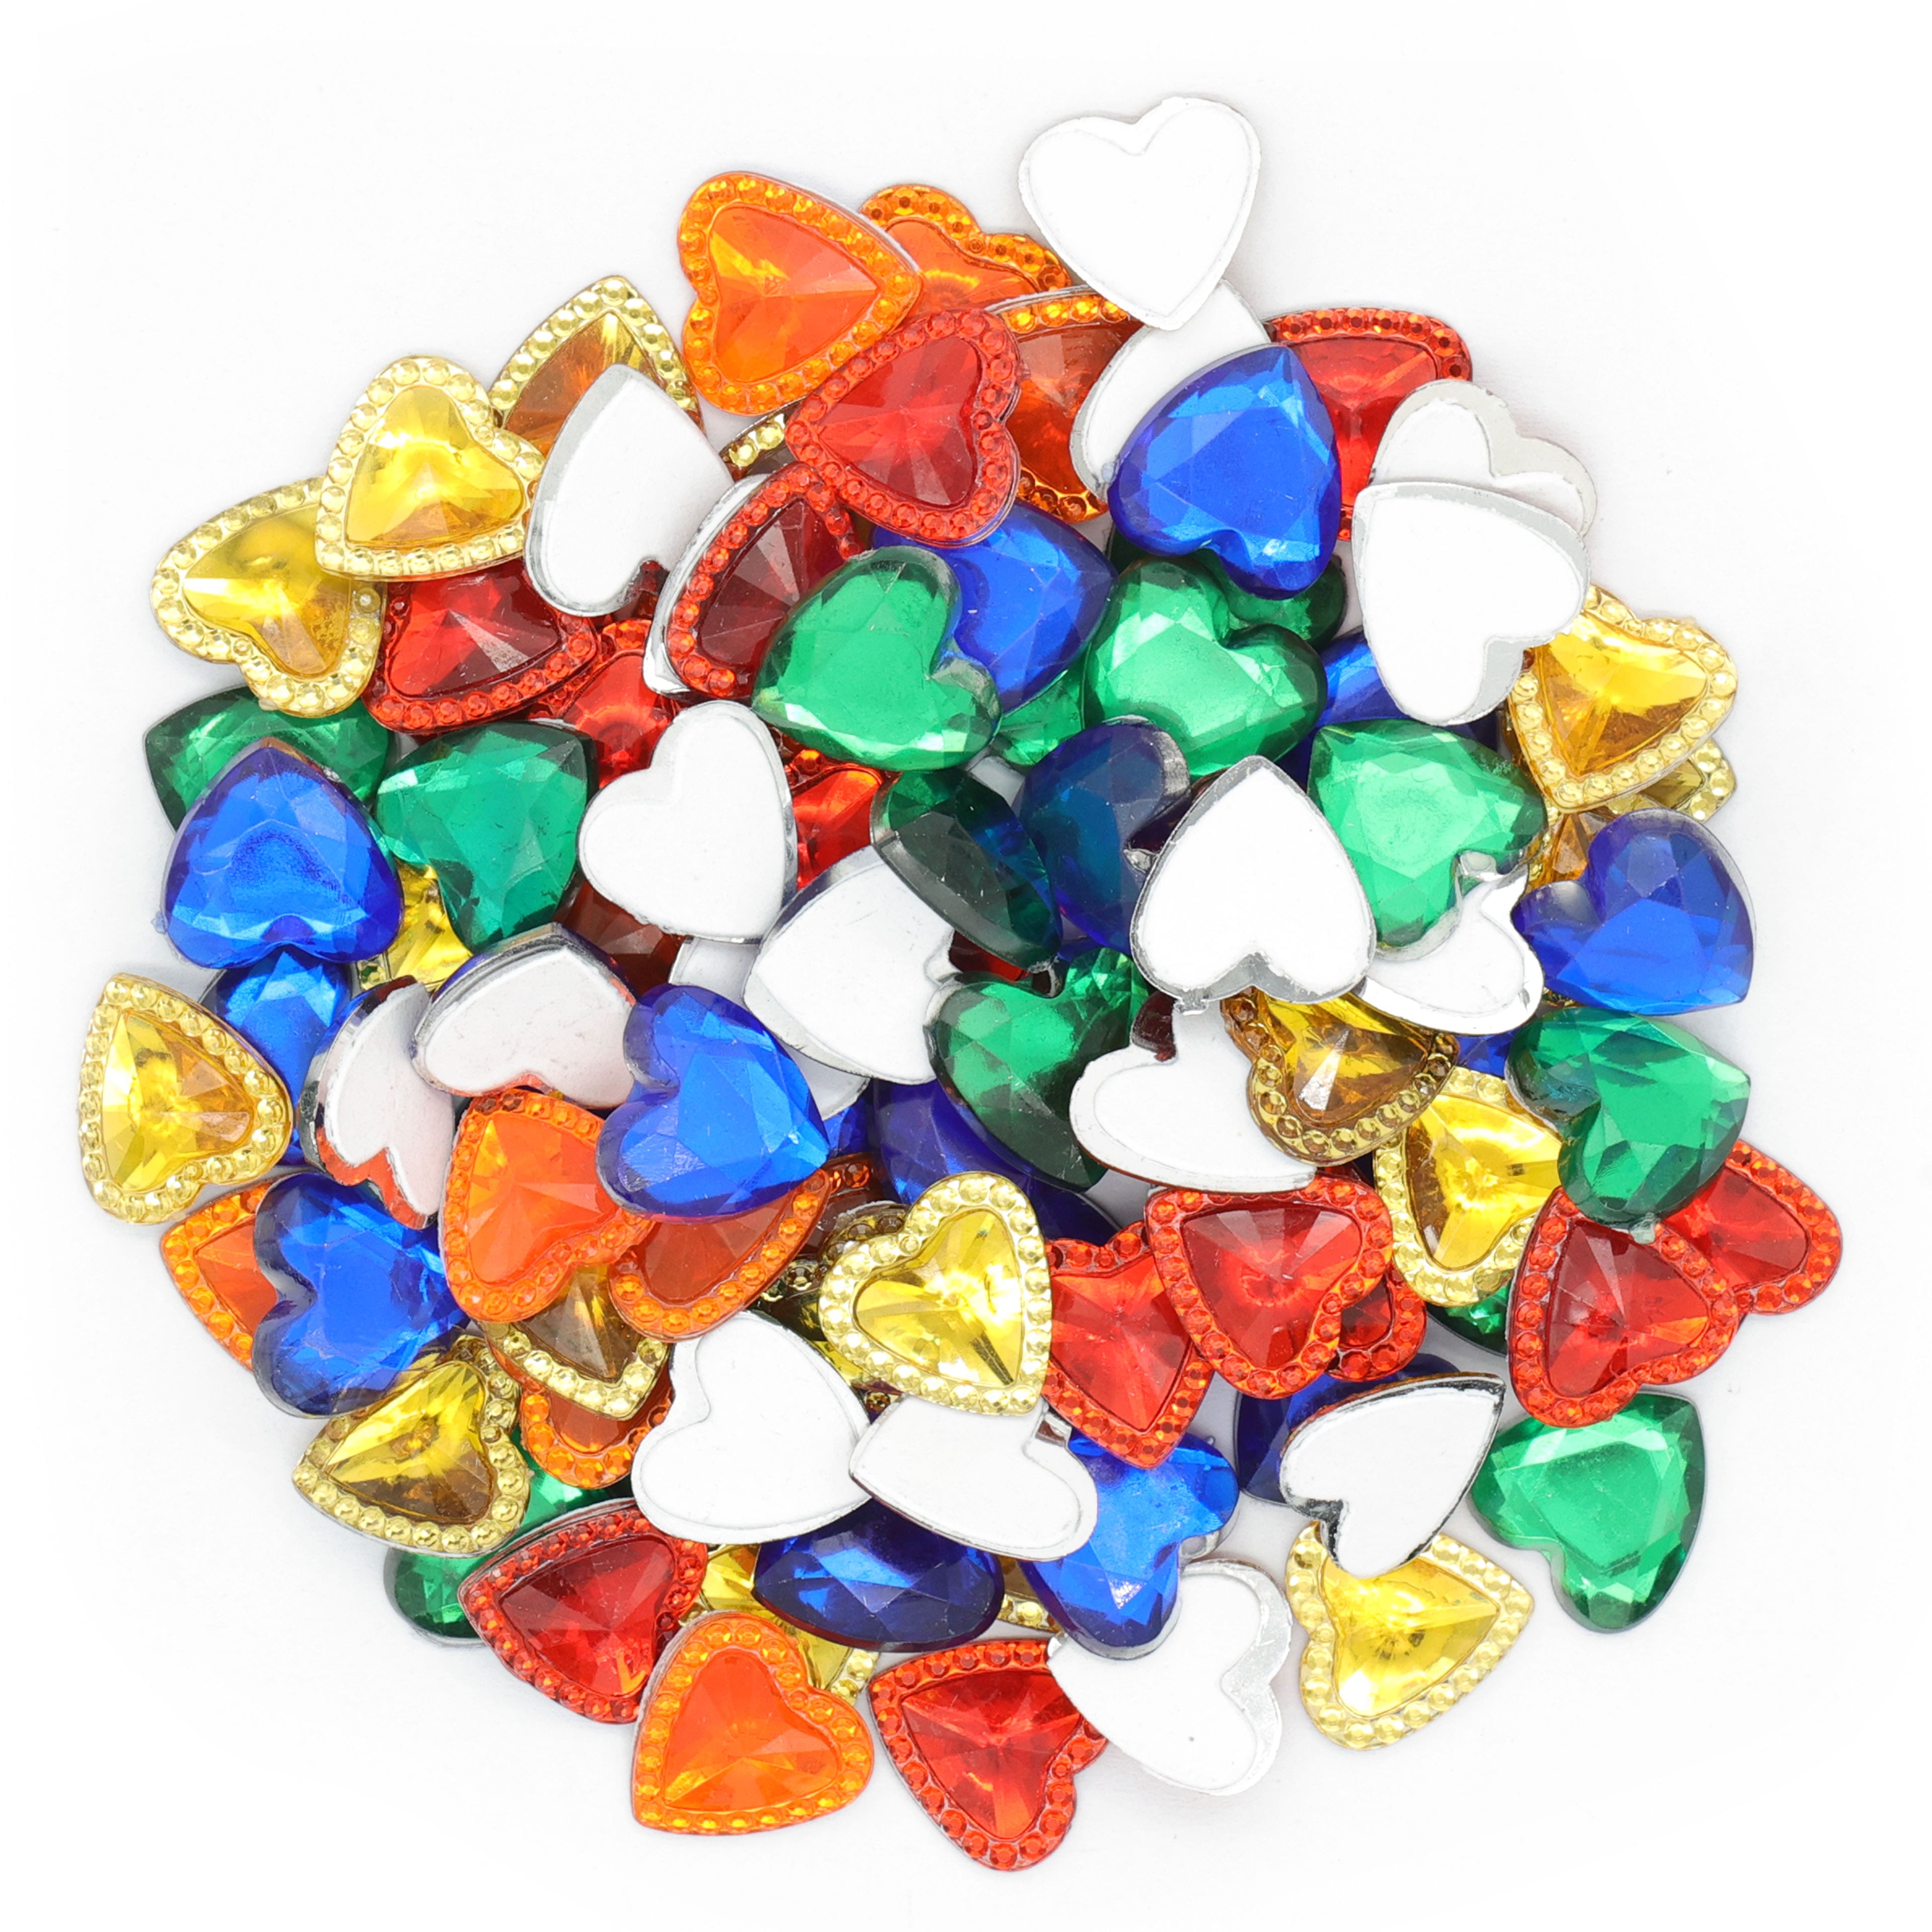 Allstarco Rhinestone Bulk Crafting Gems. Assorted Colors, Shapes, and Sizes - 1 Pound (1 Pack)